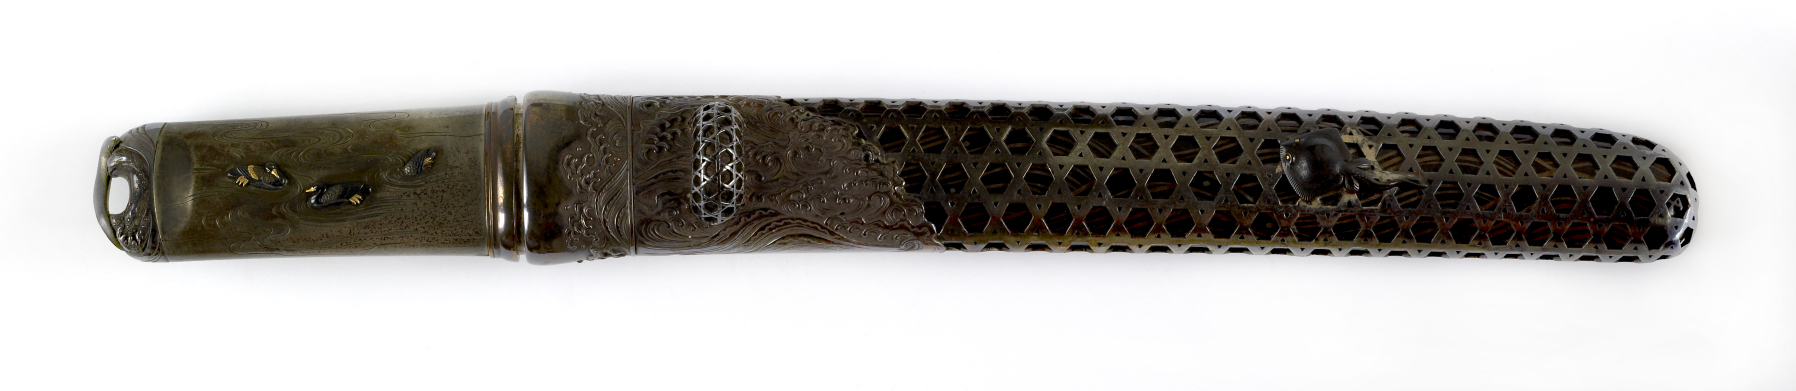 Image for Dagger (aikuchi) with black lacquer saya covered with silver basket weave over gold waves (includes 51.1283.1-51.1283.4)